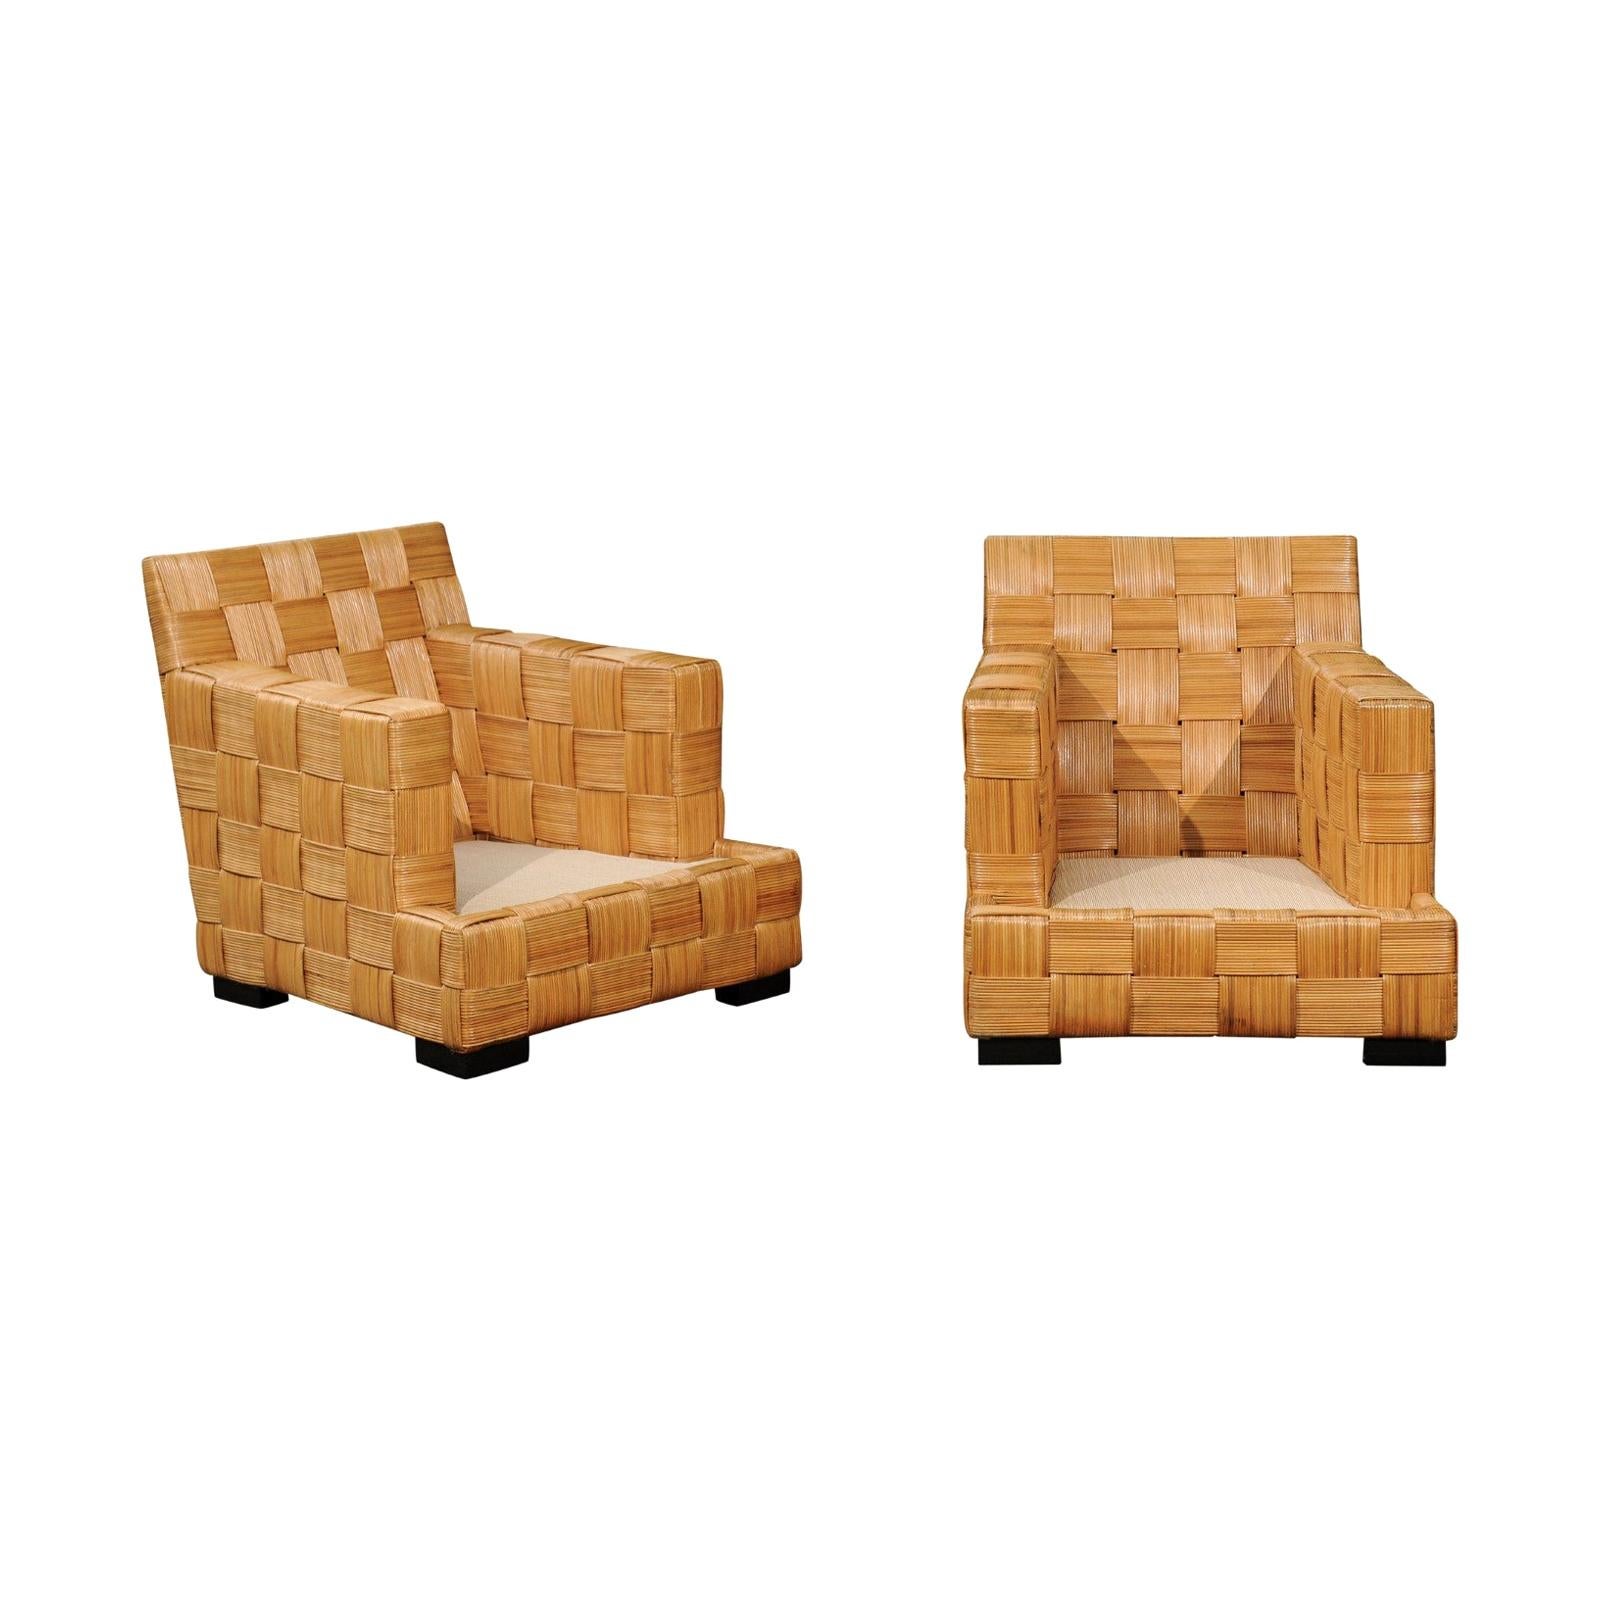 Stunning Pair of Block Island Club Chairs by John Hutton for Donghia - 2 Pair